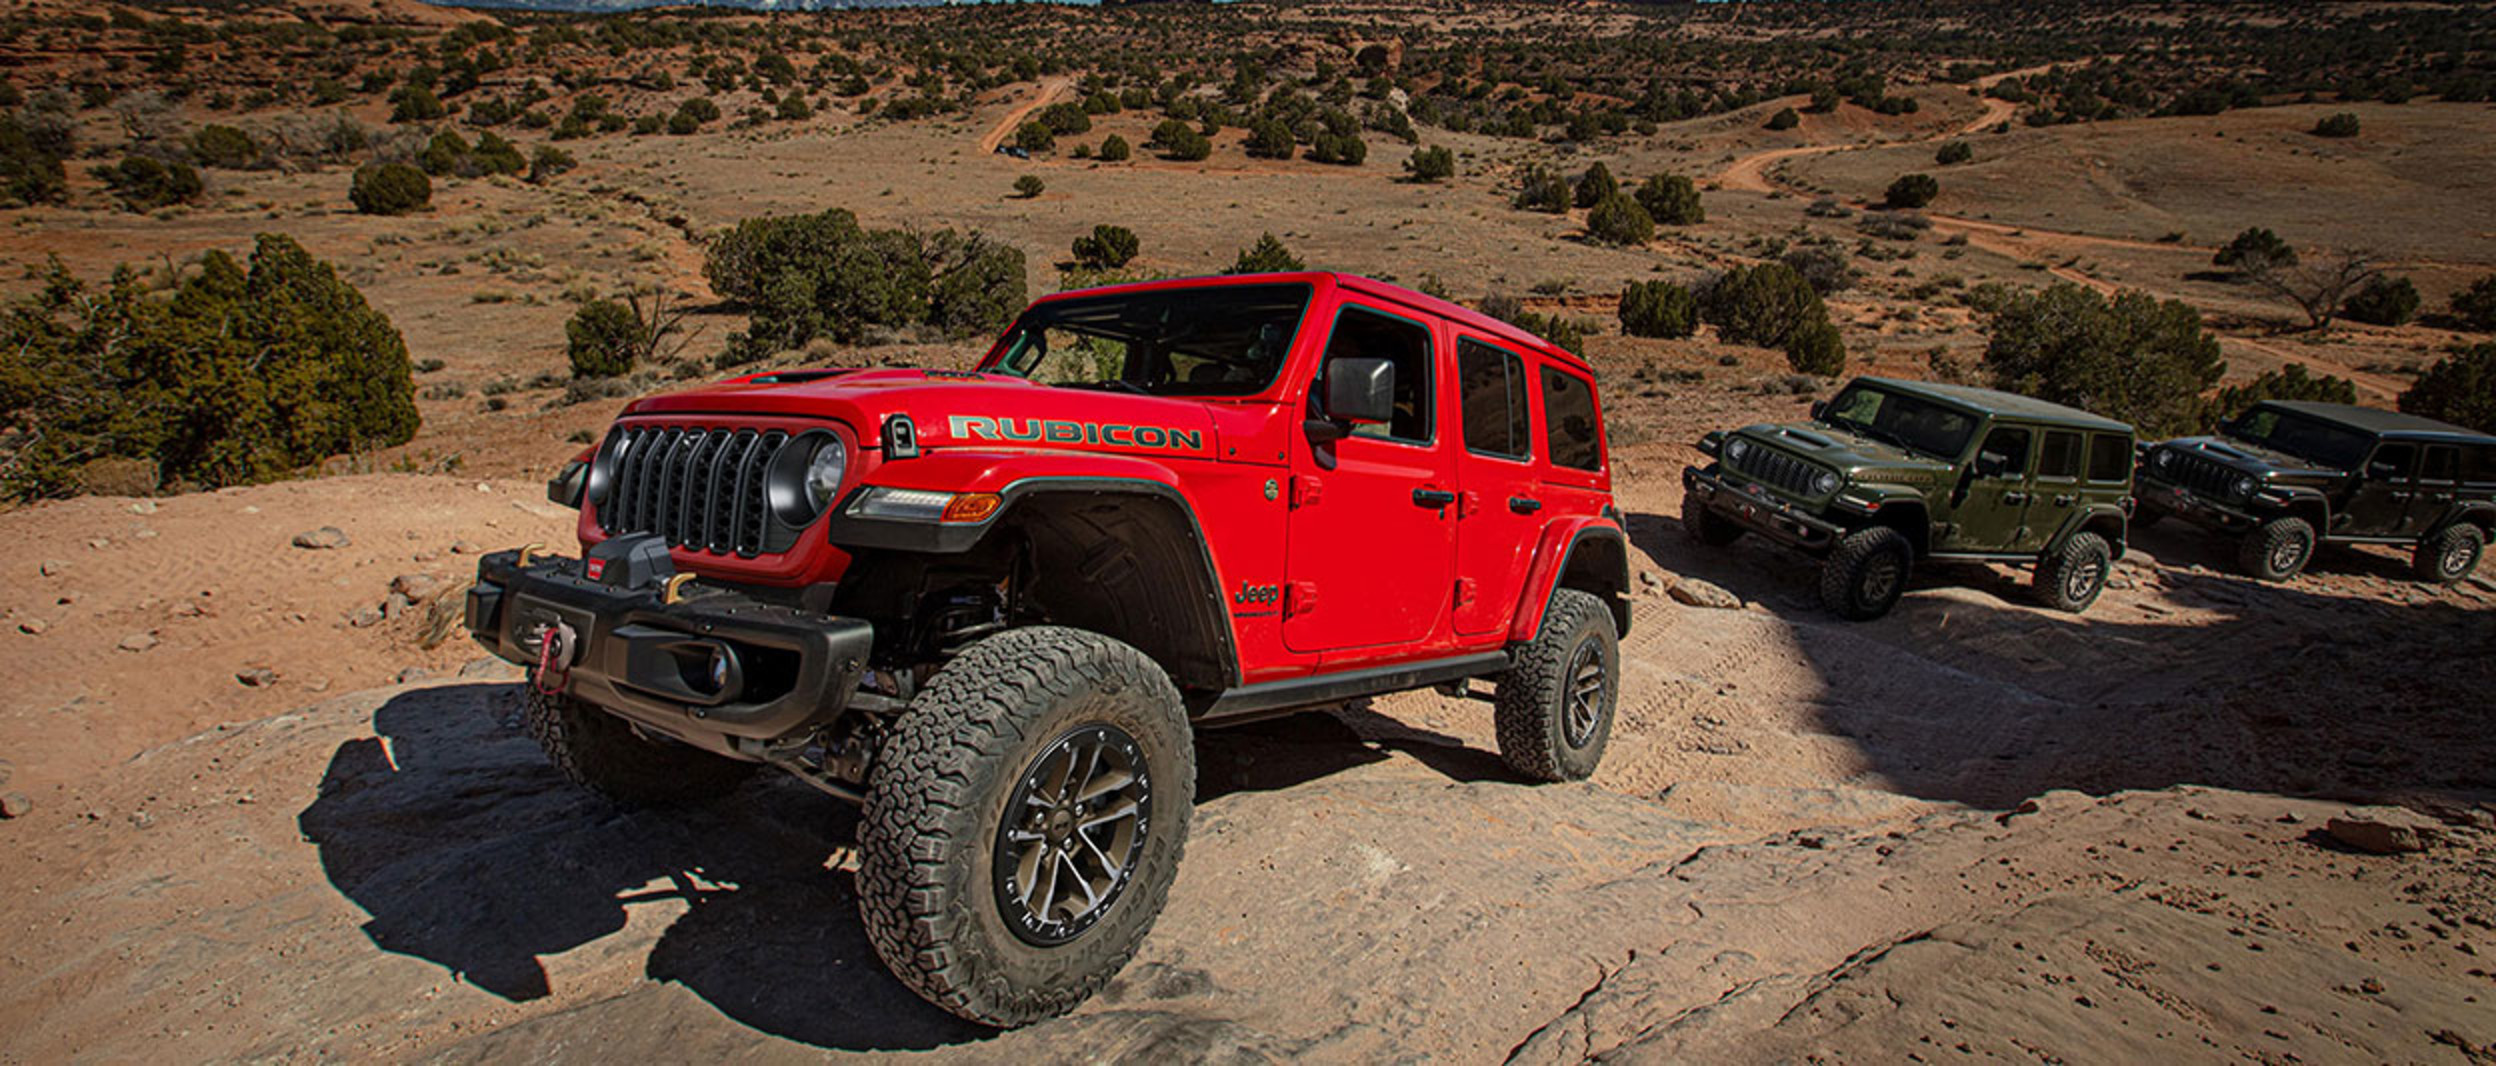 Angled view of a red Jeep Rubicon shown driving uphill on rocky terrain with two other Jeep models following behind.